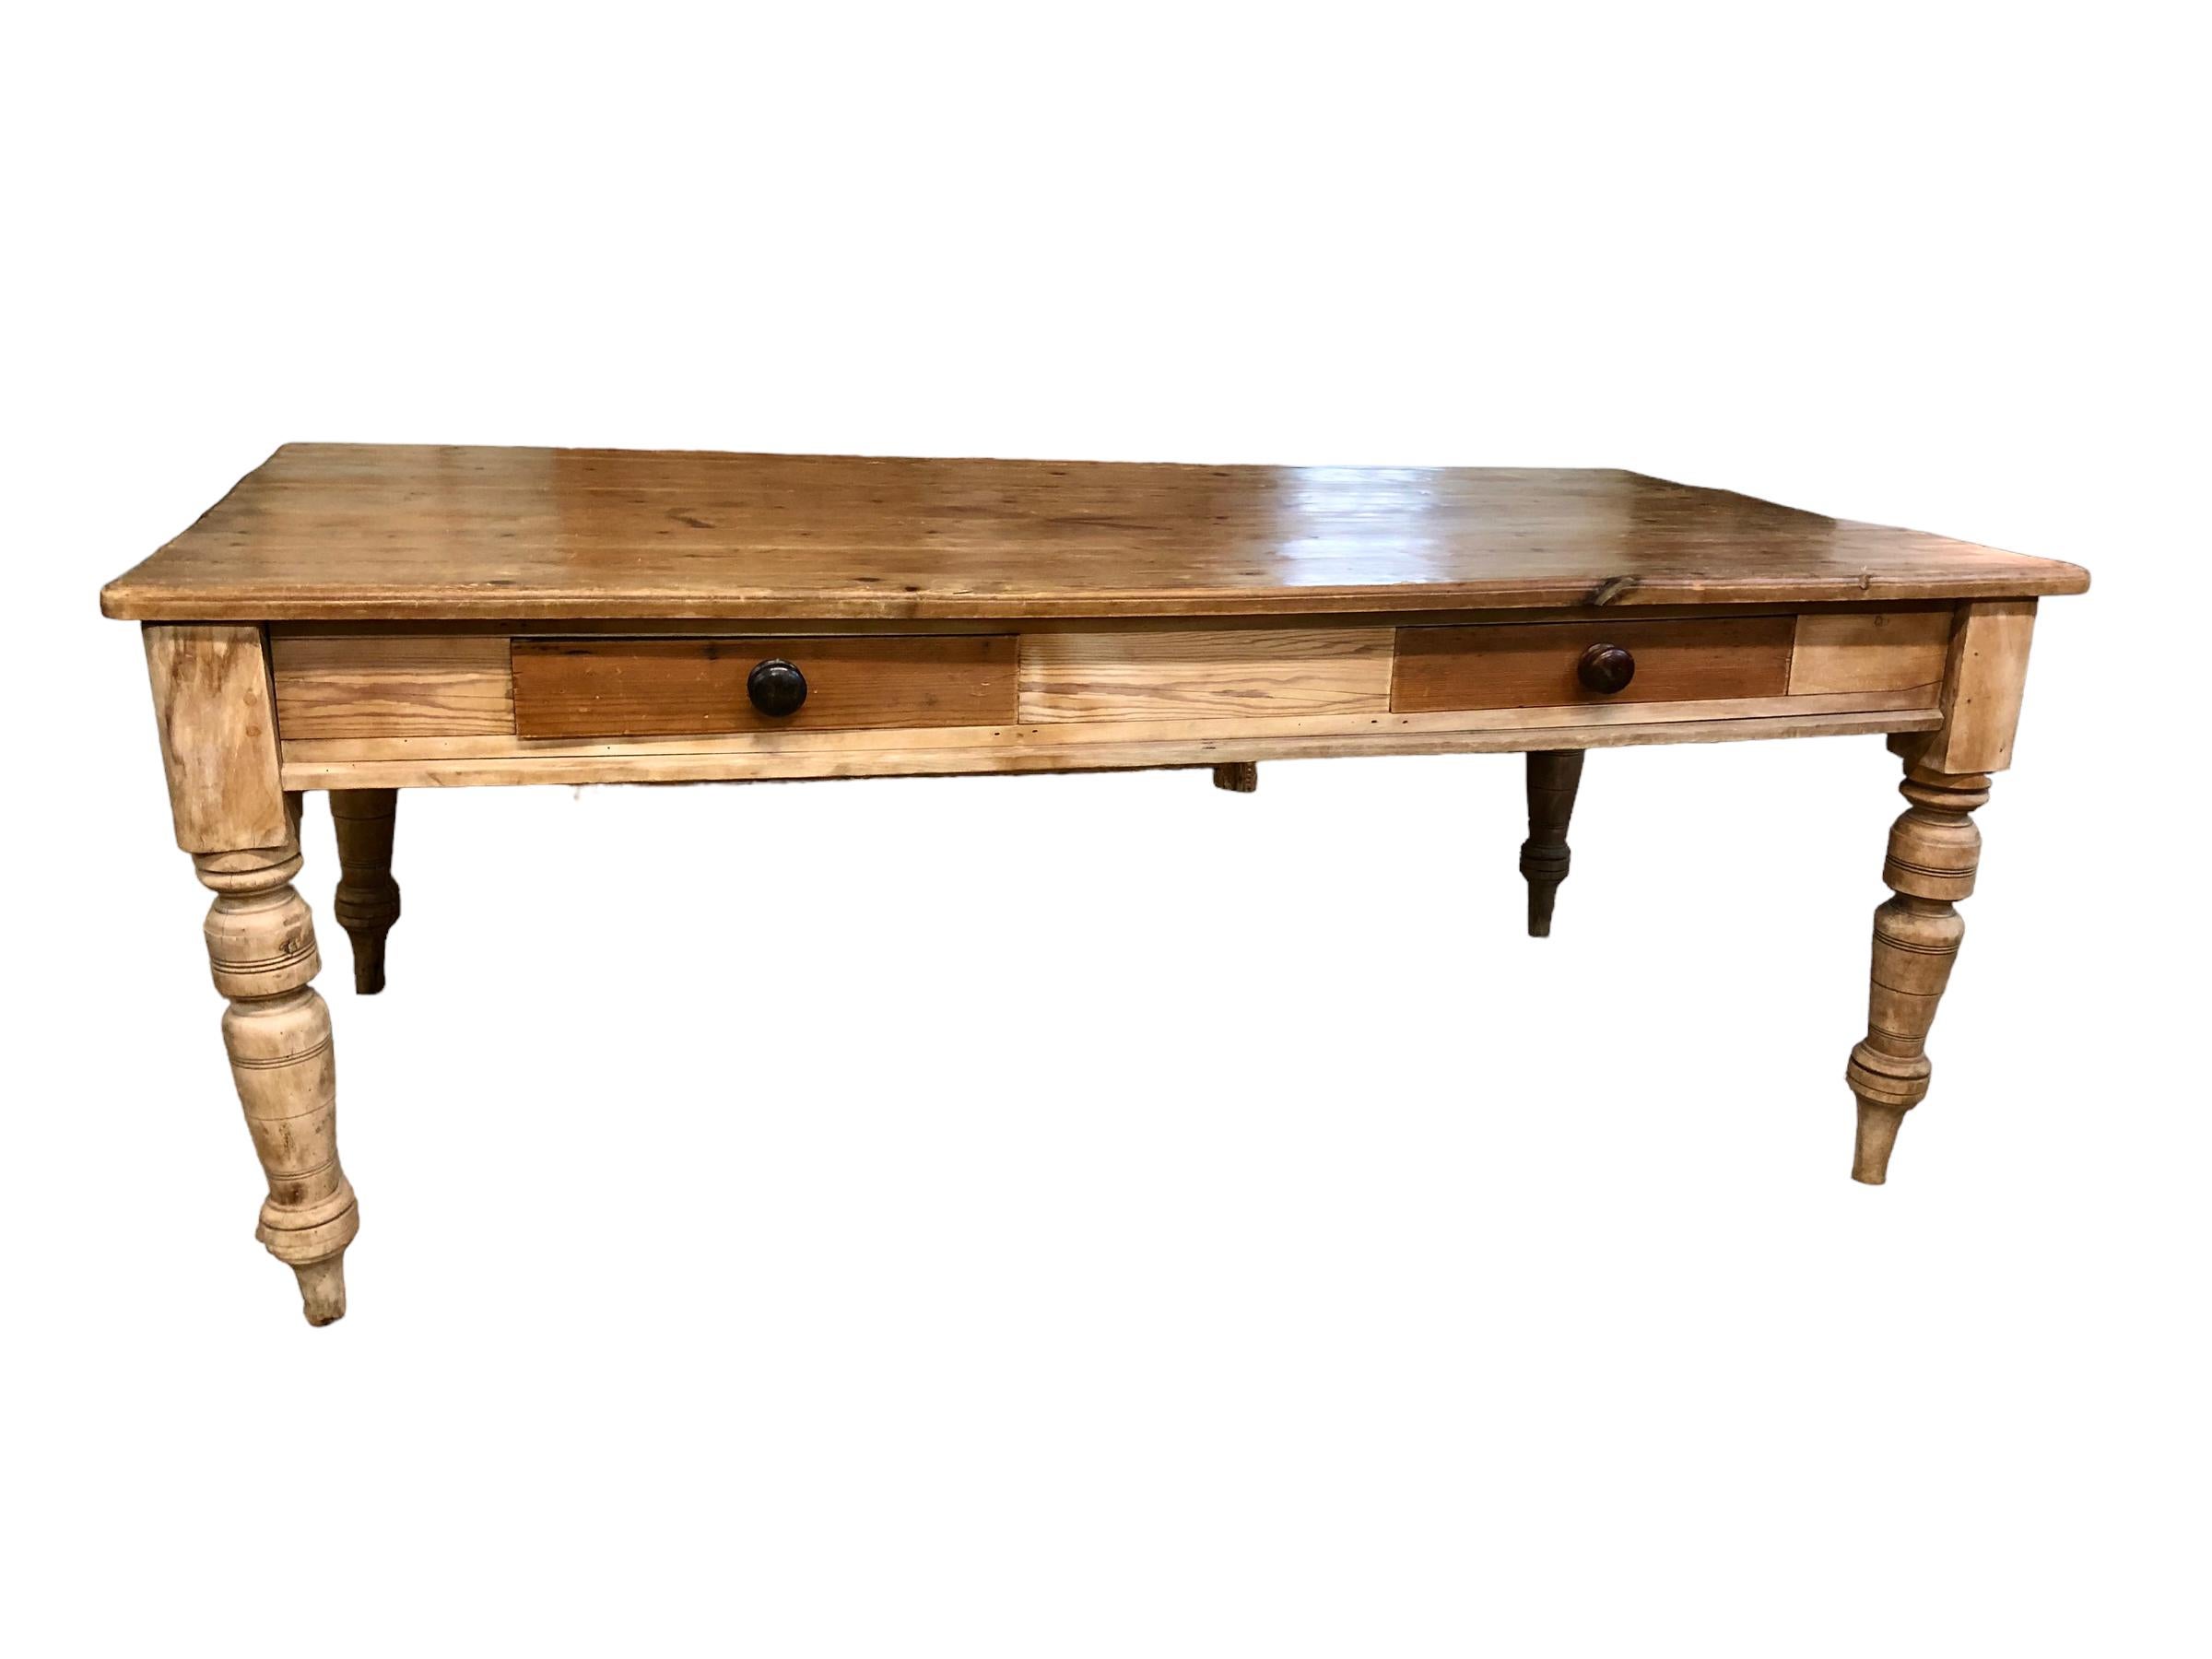 1920’s English Pine two drawers Farm Table. Table has a beautiful thick top that has been hand planed and a wonderful patina. Table is raised on solid turned legs. Each drawer runs almost the entire depth of the table offering lots of storage. This